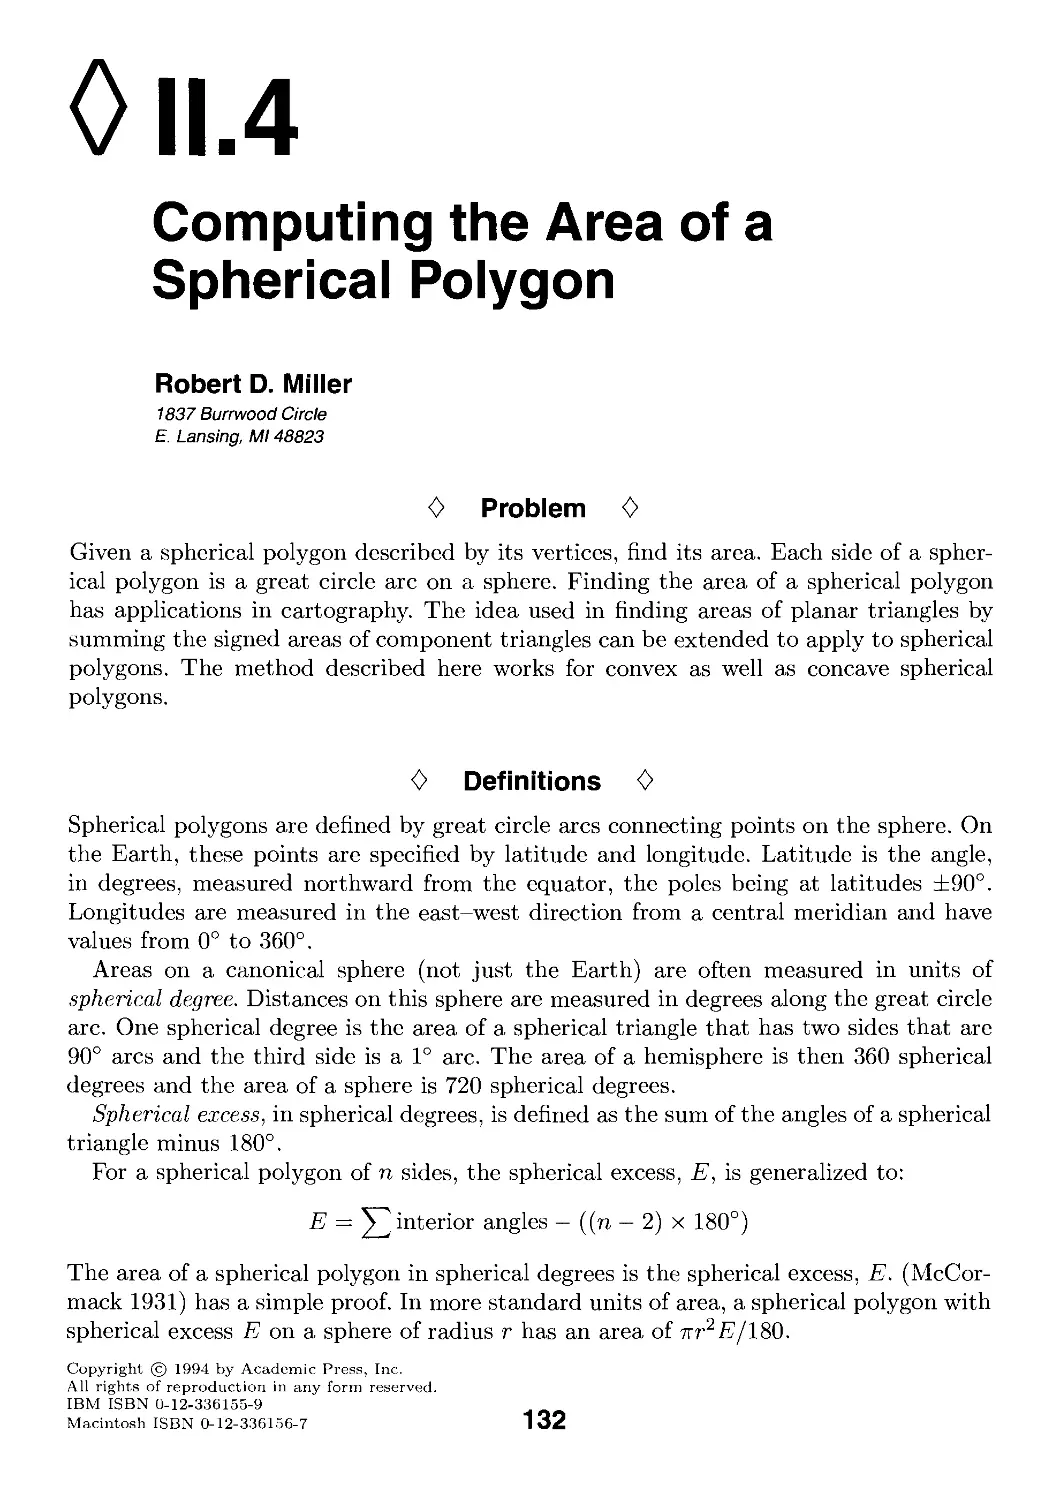 II.4. Computing the Area of a Spherical Polygon by Robert D. Miller